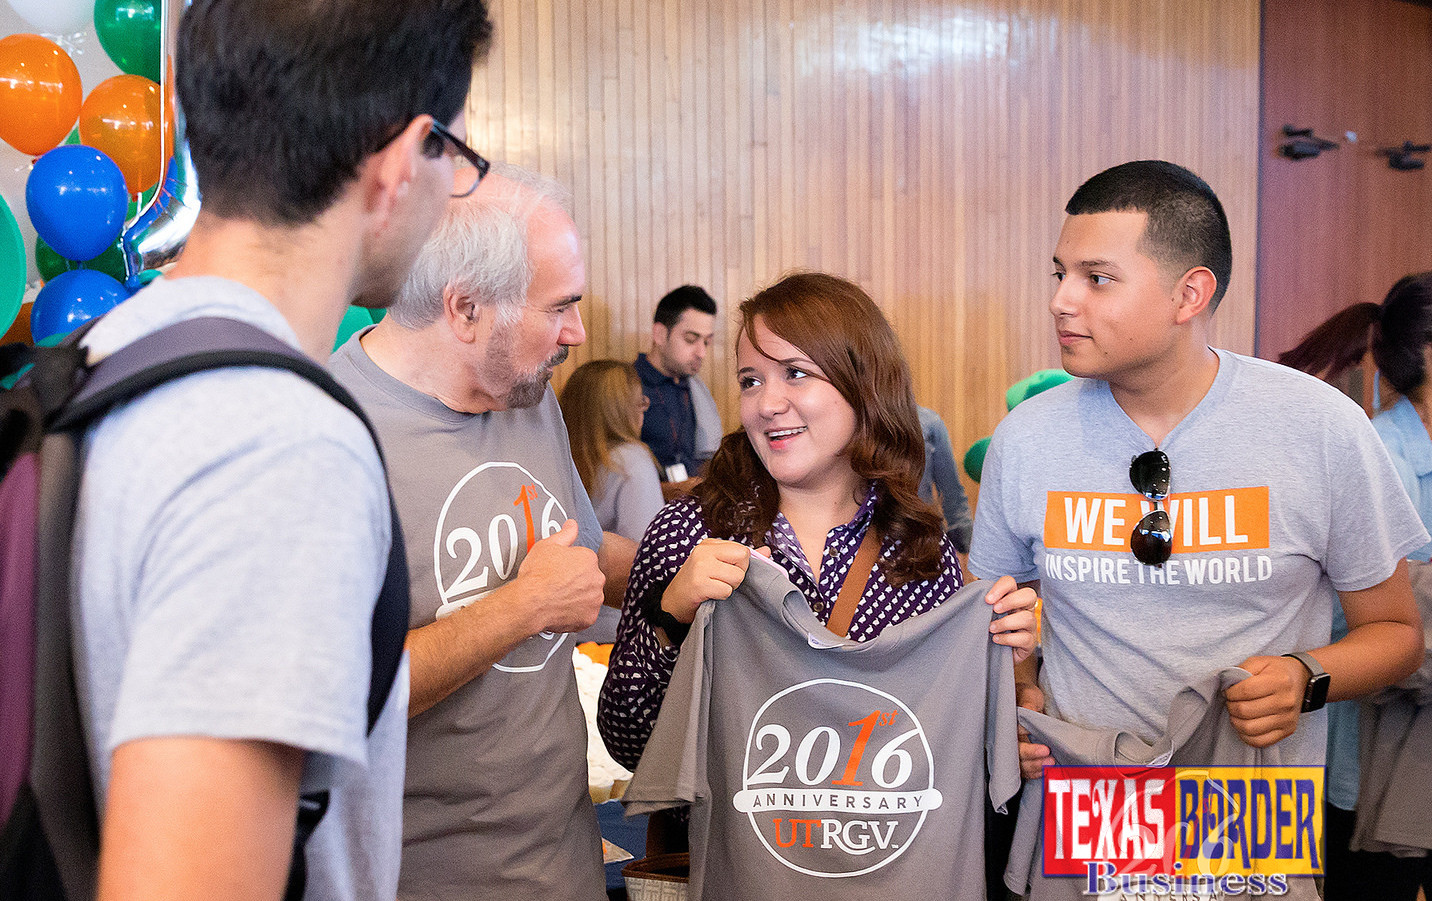 Featured: Second from left, Dr. Guy Bailey, President, The University of Texas Rio Grande Valley, meets with students at the Edinburg campus on Wednesday, August 31, 2016, as part of celebrations marking the first anniversary of UTRGV, which was the result of state legislation in 2013 that brought together the resources of UT Pan American in Edinburg, UT-Brownsville, and the UT Regional Academic Health Centers in Edinburg and Harlingen. The Edinburg Mayor and Edinburg City Council, along with the Edinburg Economic Development Corporation, helped lobby the Texas Legislature and the UT System Board of Regents for the creation of UTRGV, which also includes a School of Medicine with a major campus in Edinburg. Photograph By PAUL CHOUY